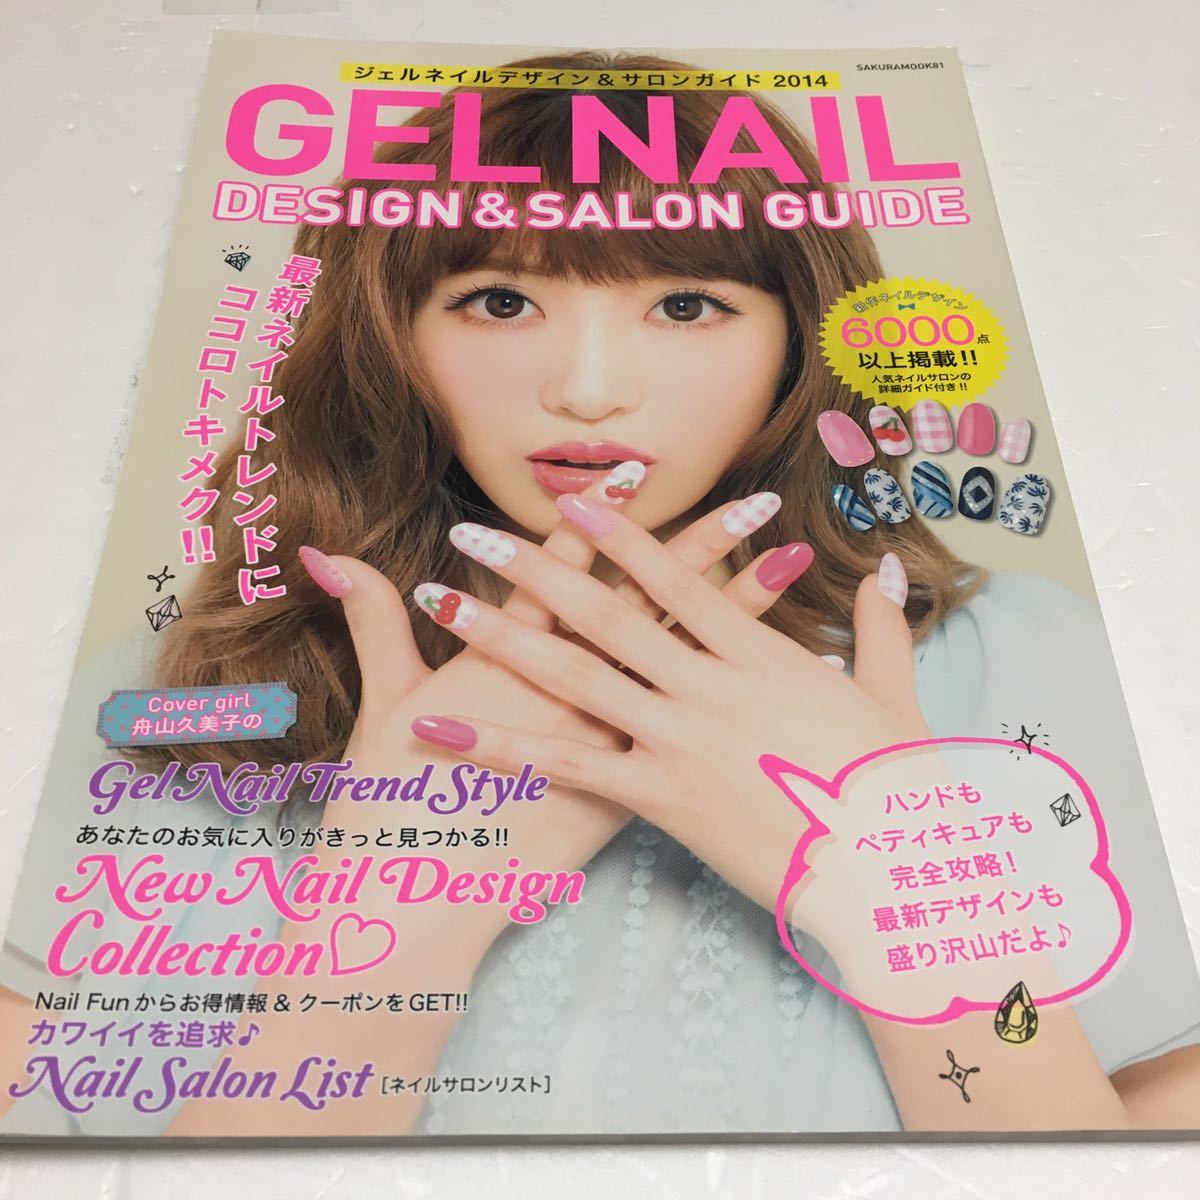  prompt decision Yu-Mail flight only free shipping GELNAIL gel nails design & salon guide newest nails boat mountain . beautiful .JAN978-4773054903